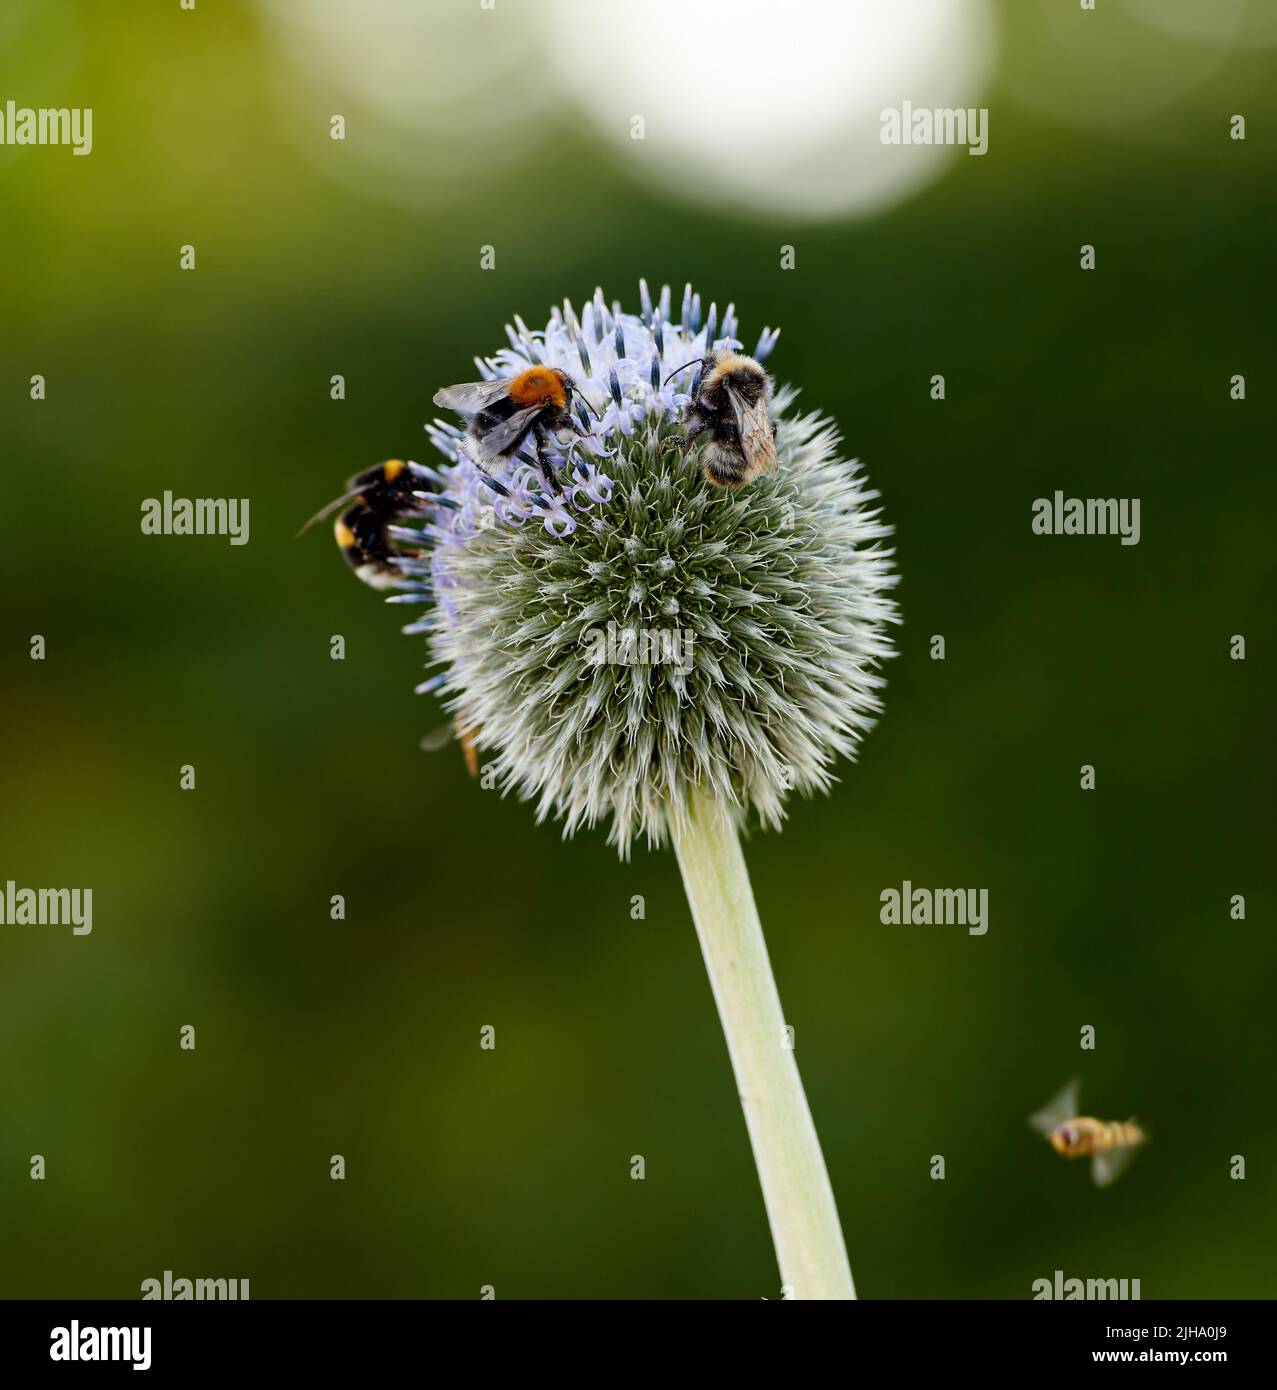 Closeup of globe thistle plants being pollinated by bees in a garden against a blurred nature background. Echinops flora growing on a green field in Stock Photo